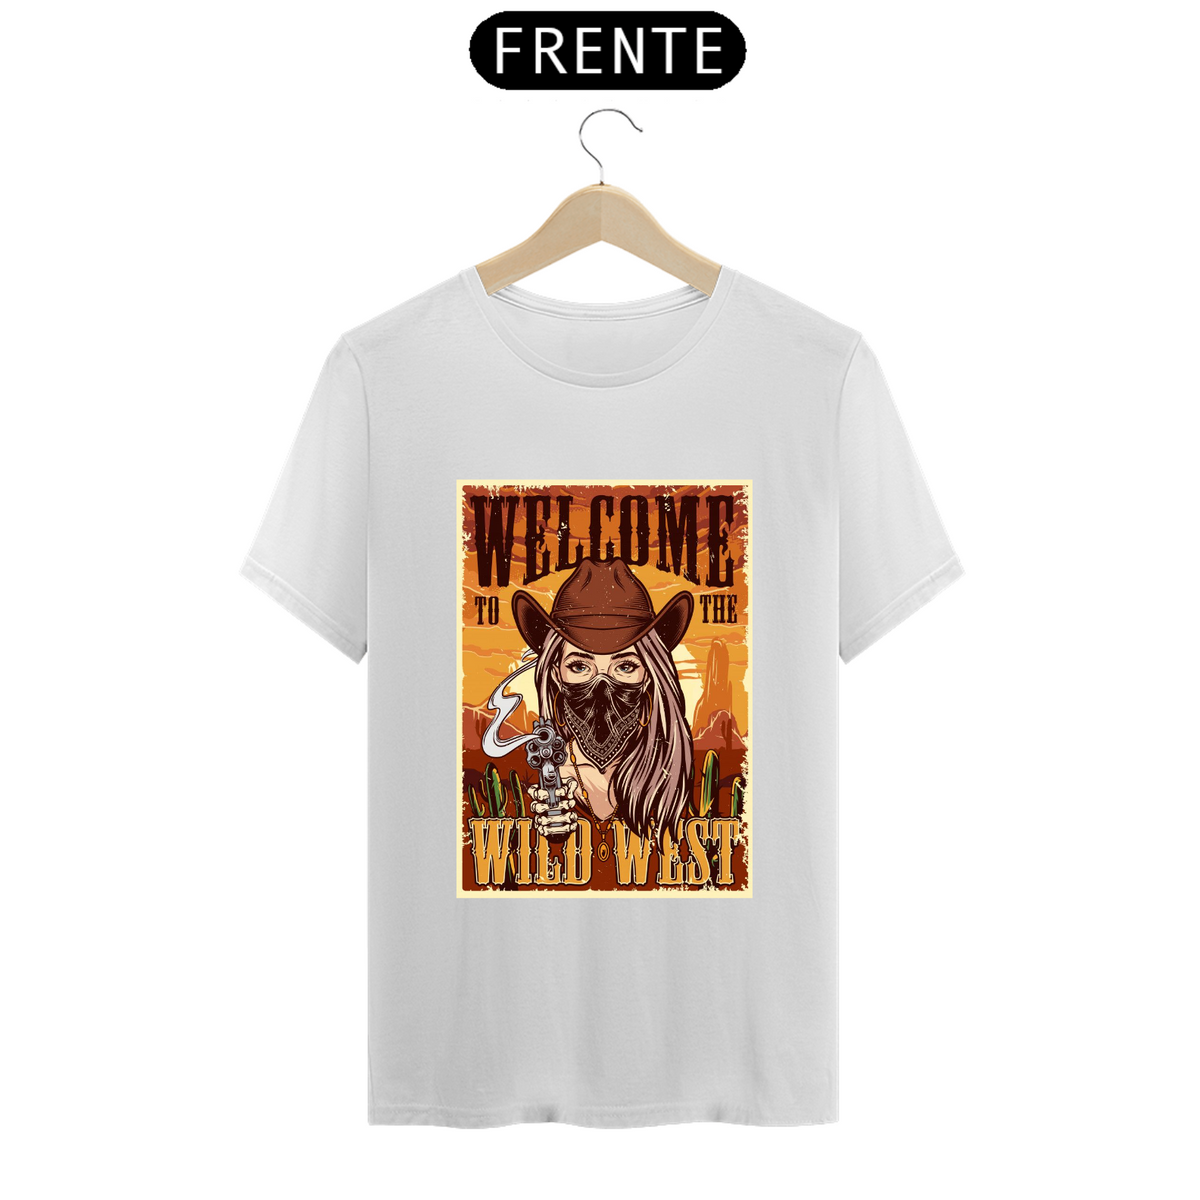 Nome do produto: T-Shirt Prime - Welcome to The Wild West